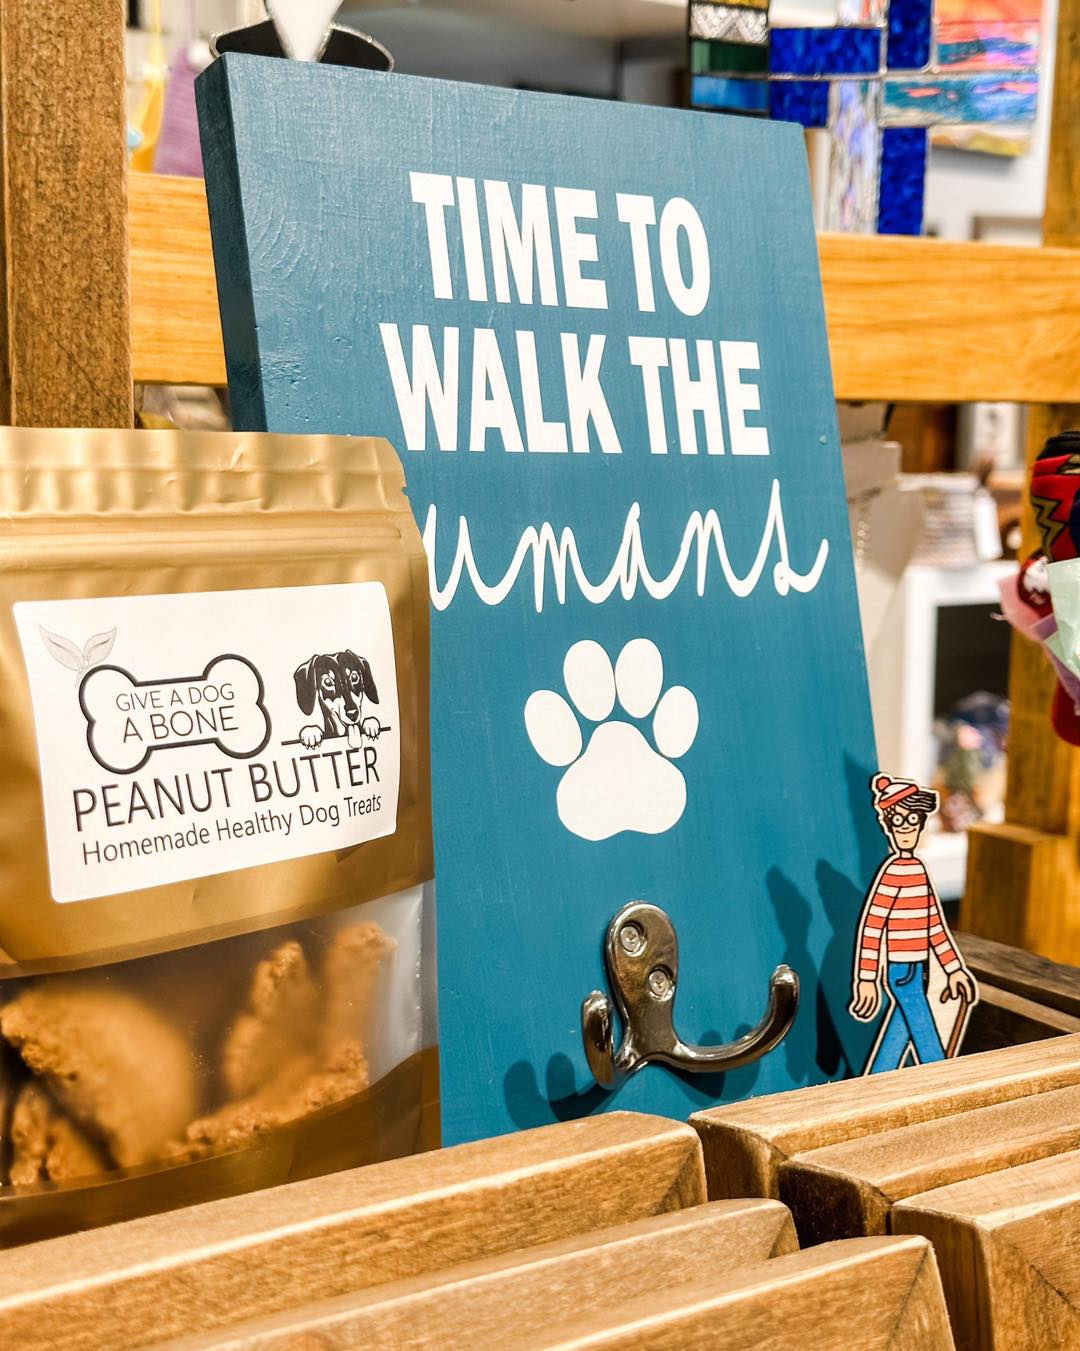 a wooden display shelf showing a bag of home-made peanut butter dog treats, a turquoise wall plaque with a leash hook on it that says "time to walk the humans" in white, and a small Where's Waldo toy hidden next to that.